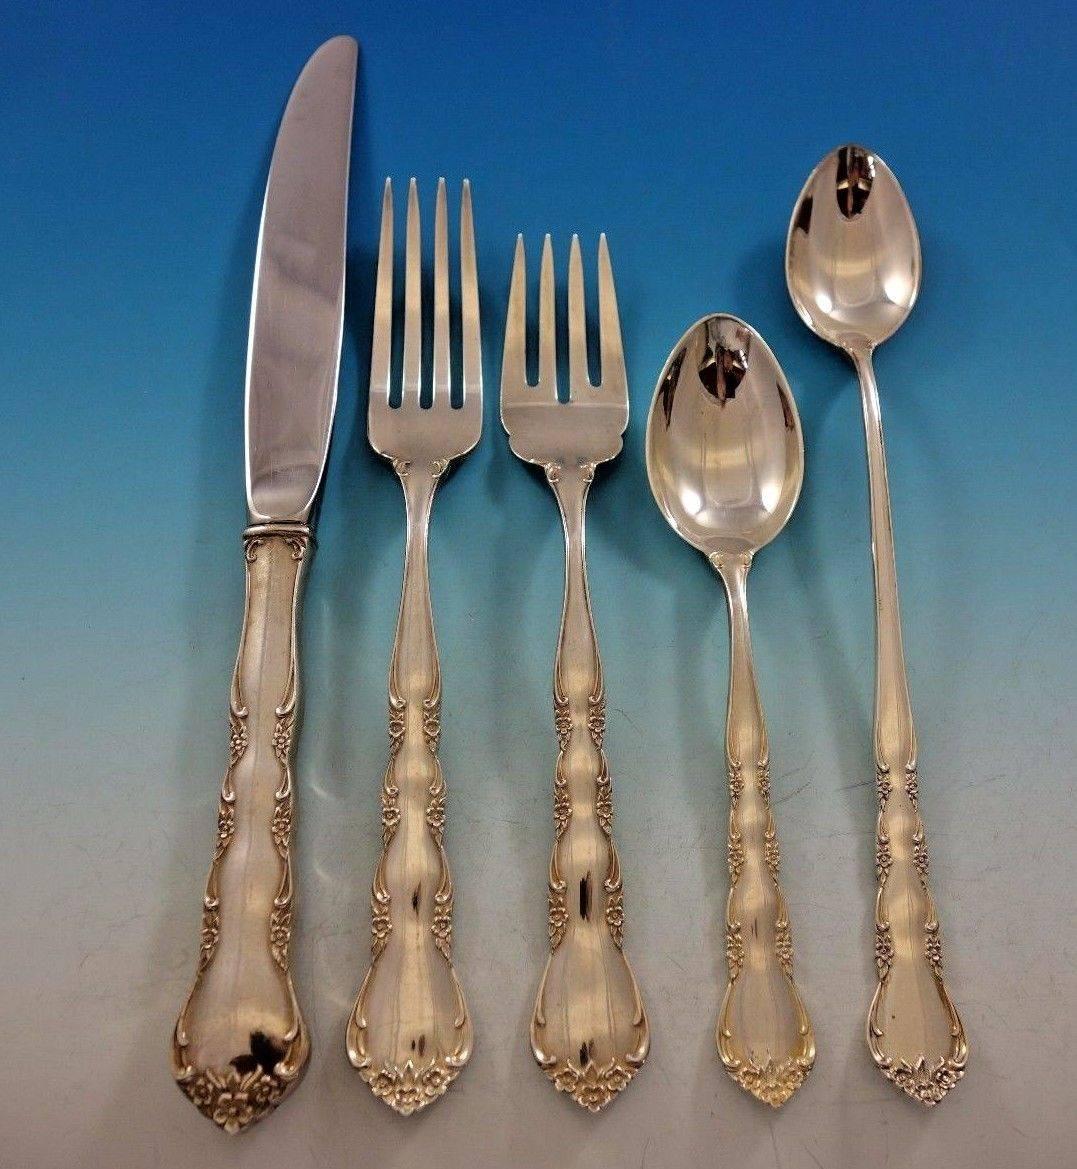 Cheryl by Kirk Sterling Silver Flatware Set for 8 Service 46 pieces For Sale 4